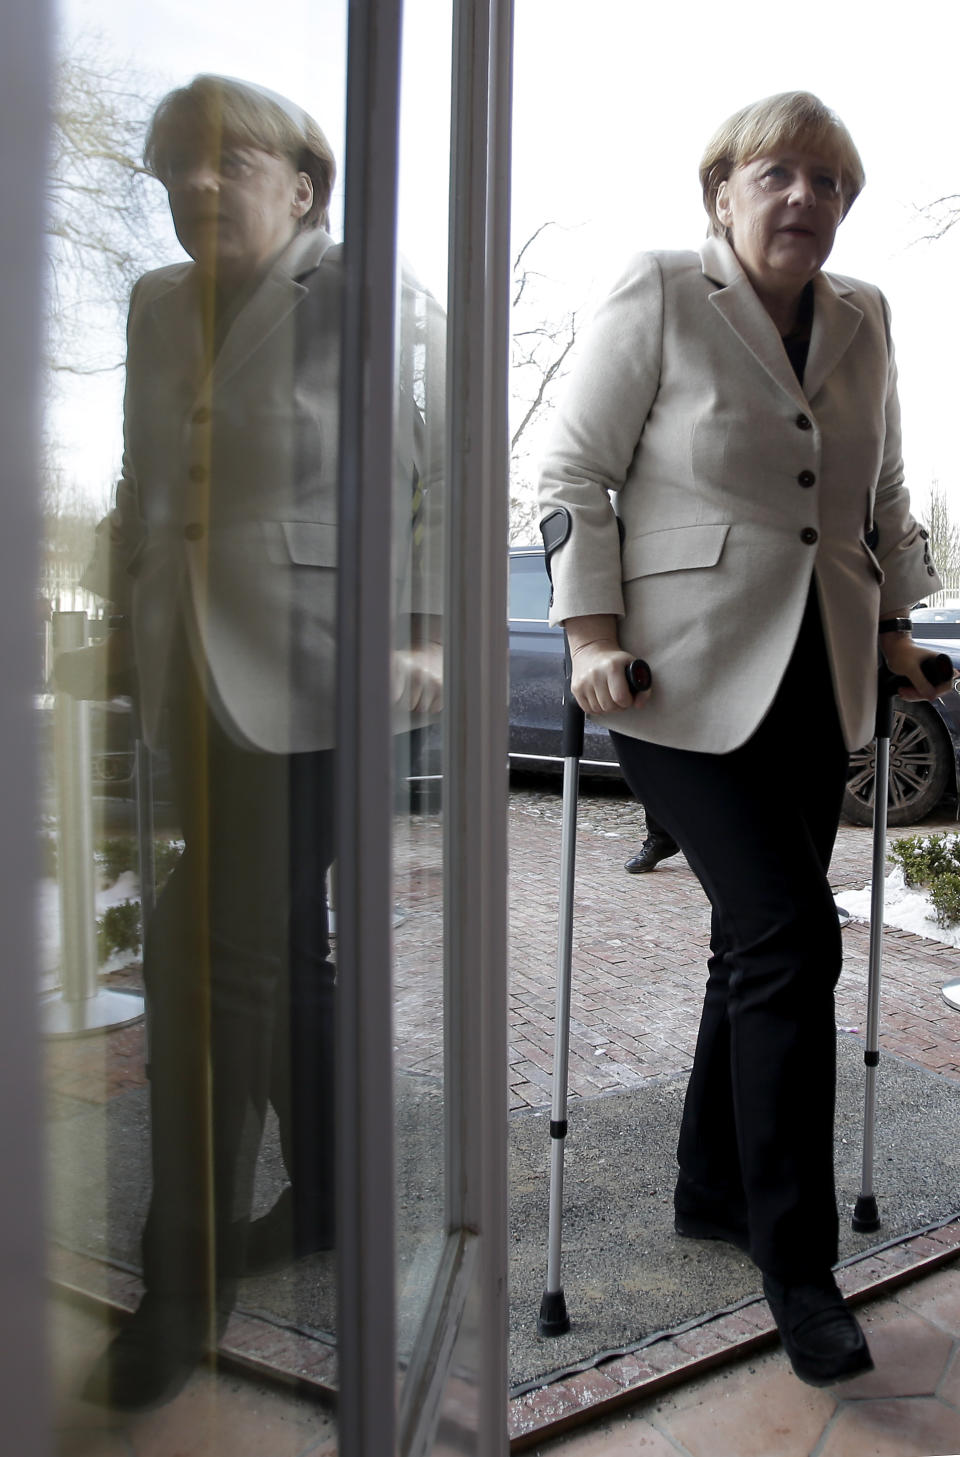 German Chancellor Angela Merkel is reflected in a glass door as she arrives for a press conference after a cabinet meeting as part of a two day closed meeting of the German government at the Meseberg palace near Berlin, Germany, Thursday, Jan. 23, 2014. Merkel uses crutches after a skiing accident. (AP Photo/Michael Sohn)